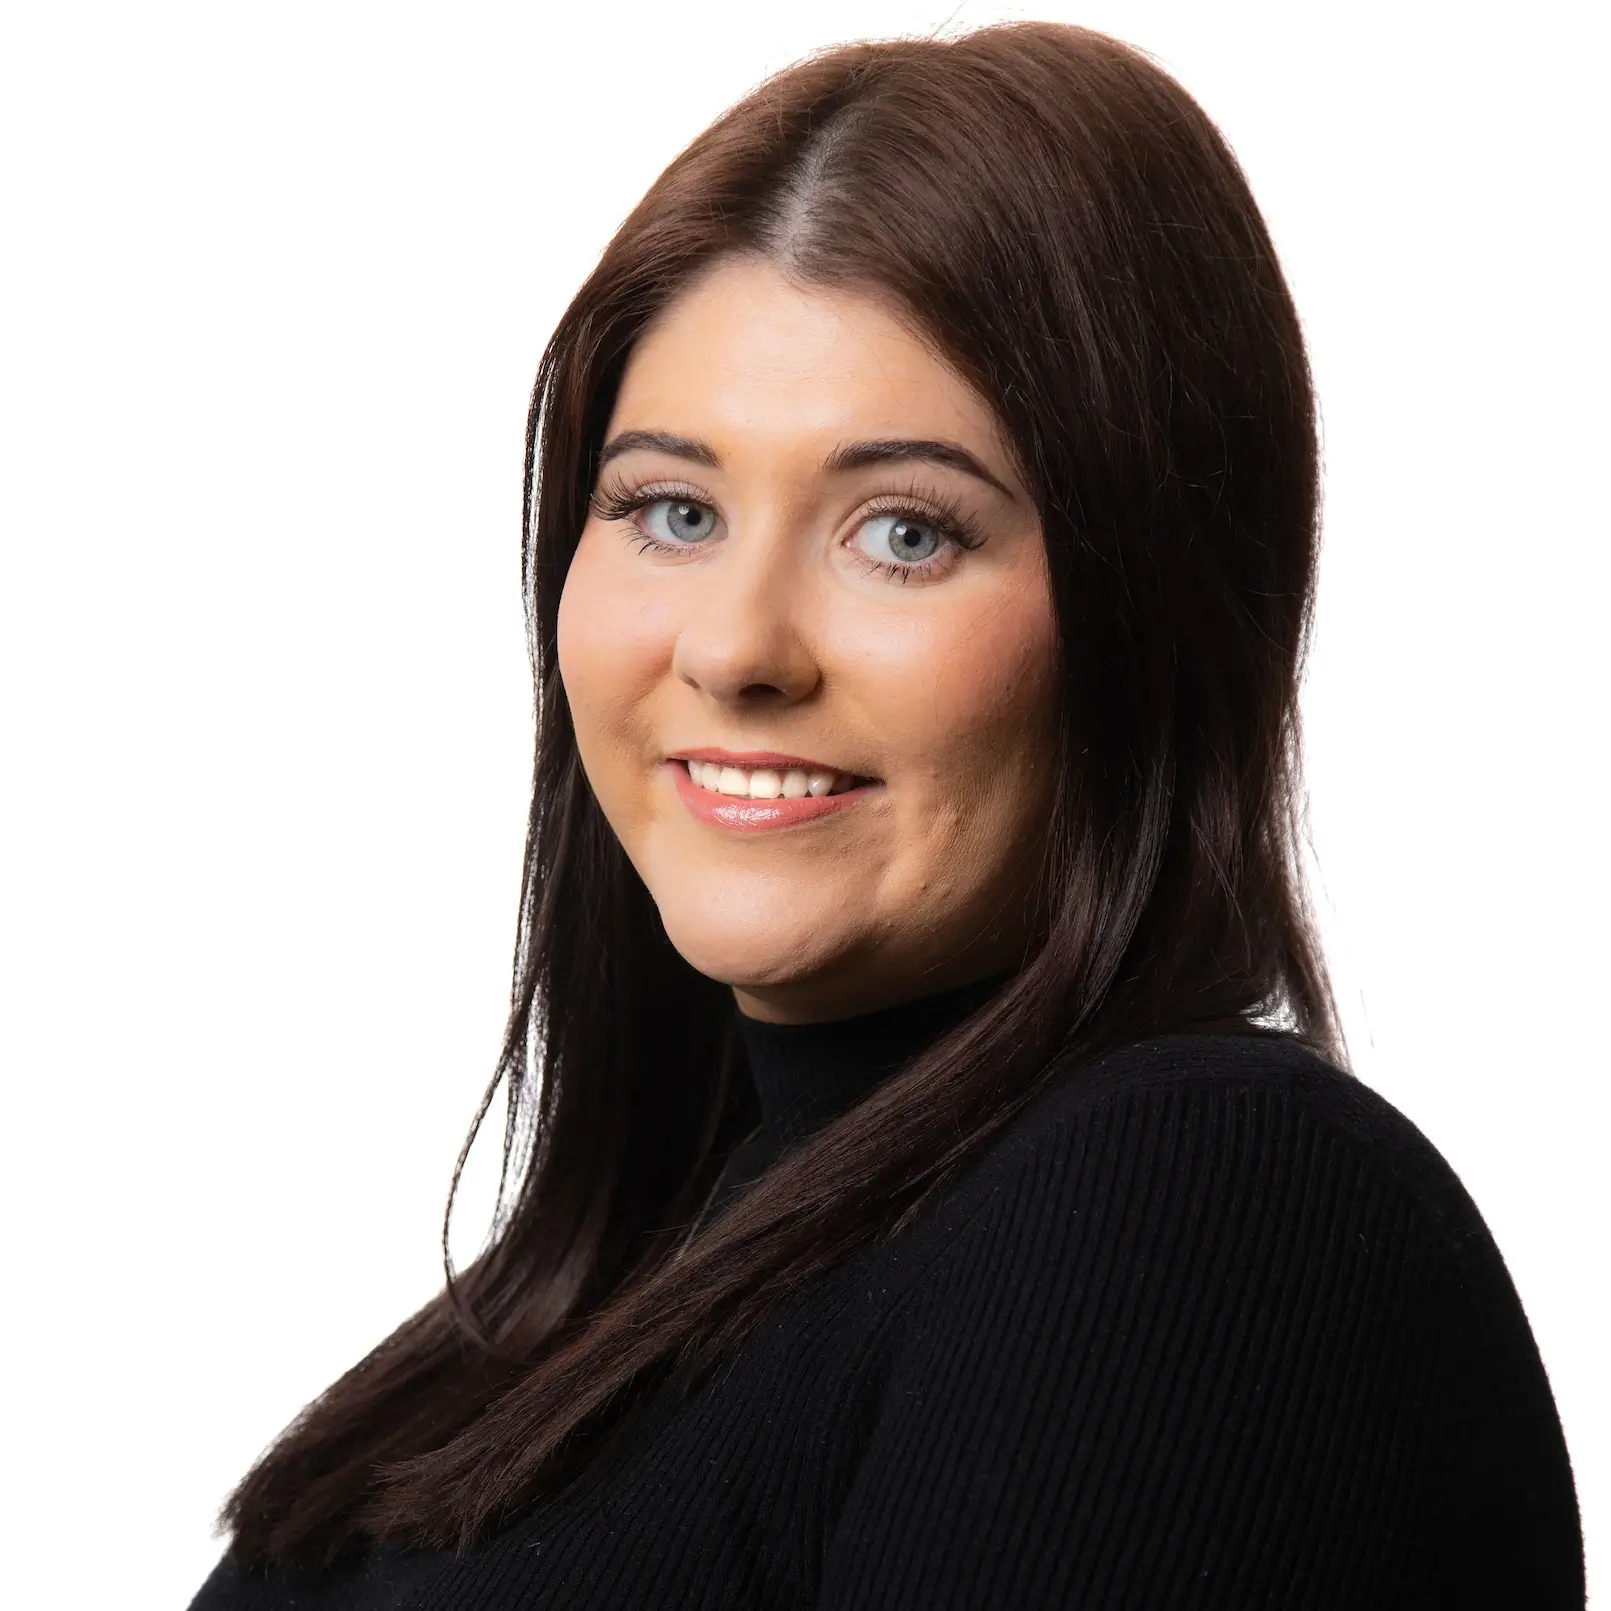 Laura McManus - Operations Support Team of DGD Shredding Secure Destruction Specialists Nationwide Services